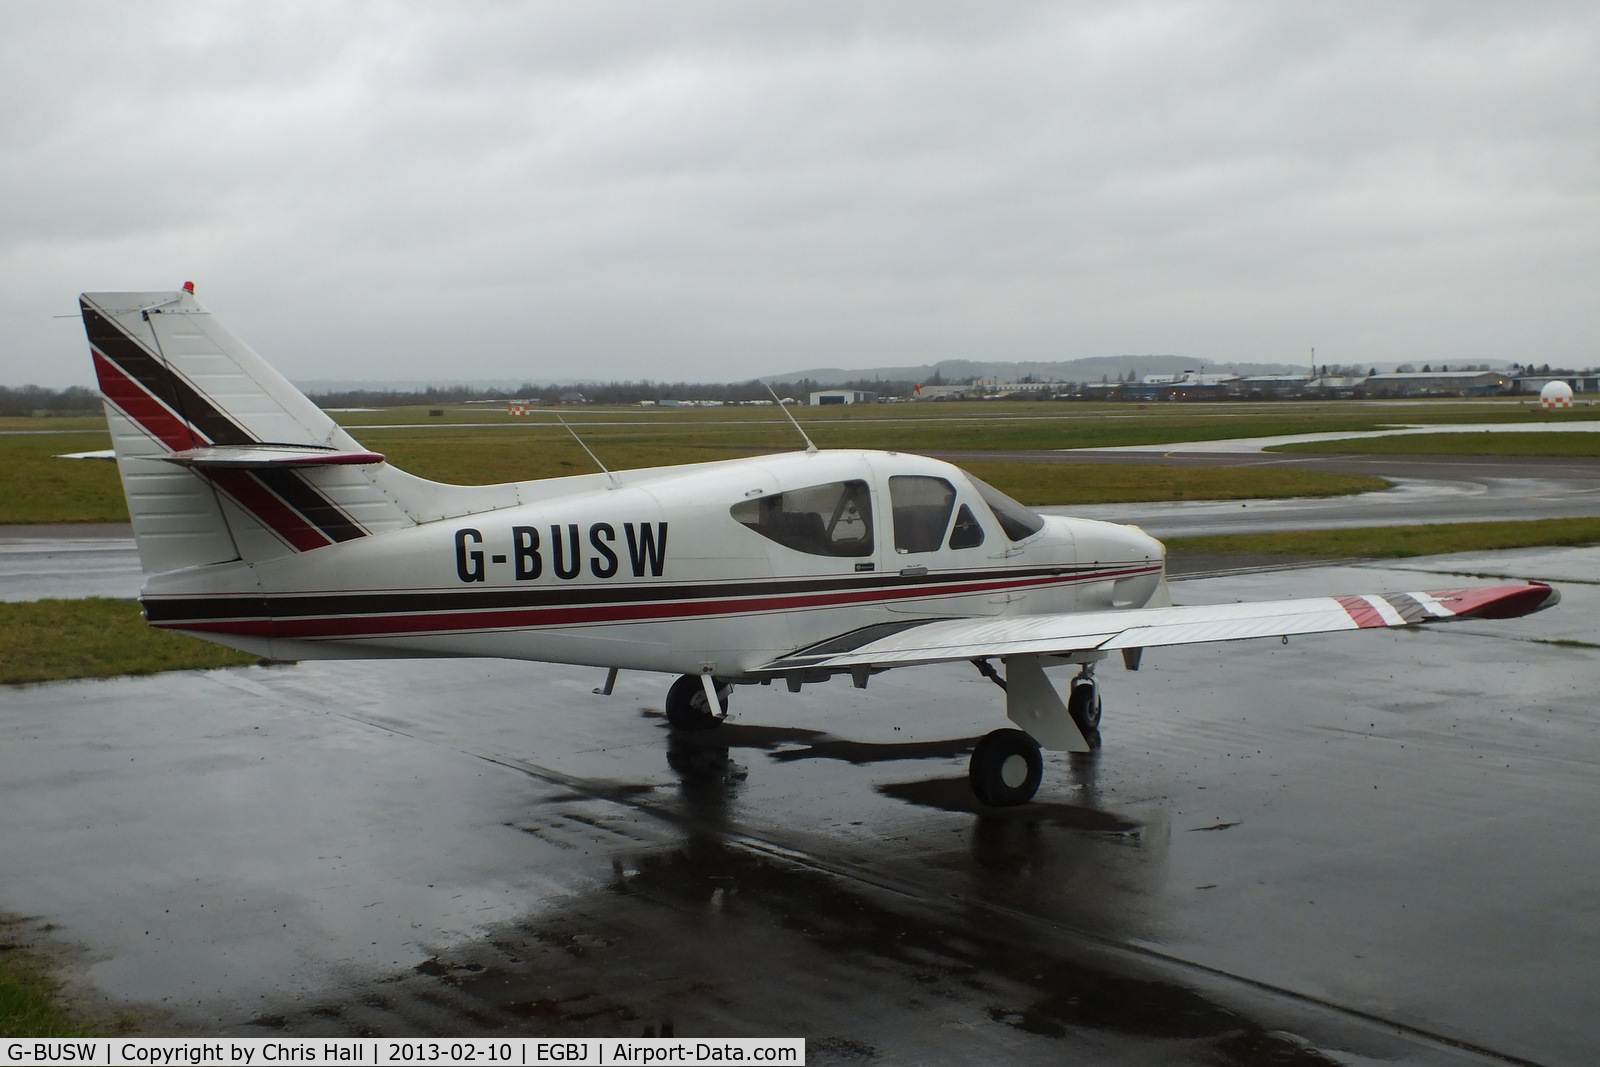 G-BUSW, 1976 Rockwell Commander 114 C/N 14079, at Gloucestershire Airport